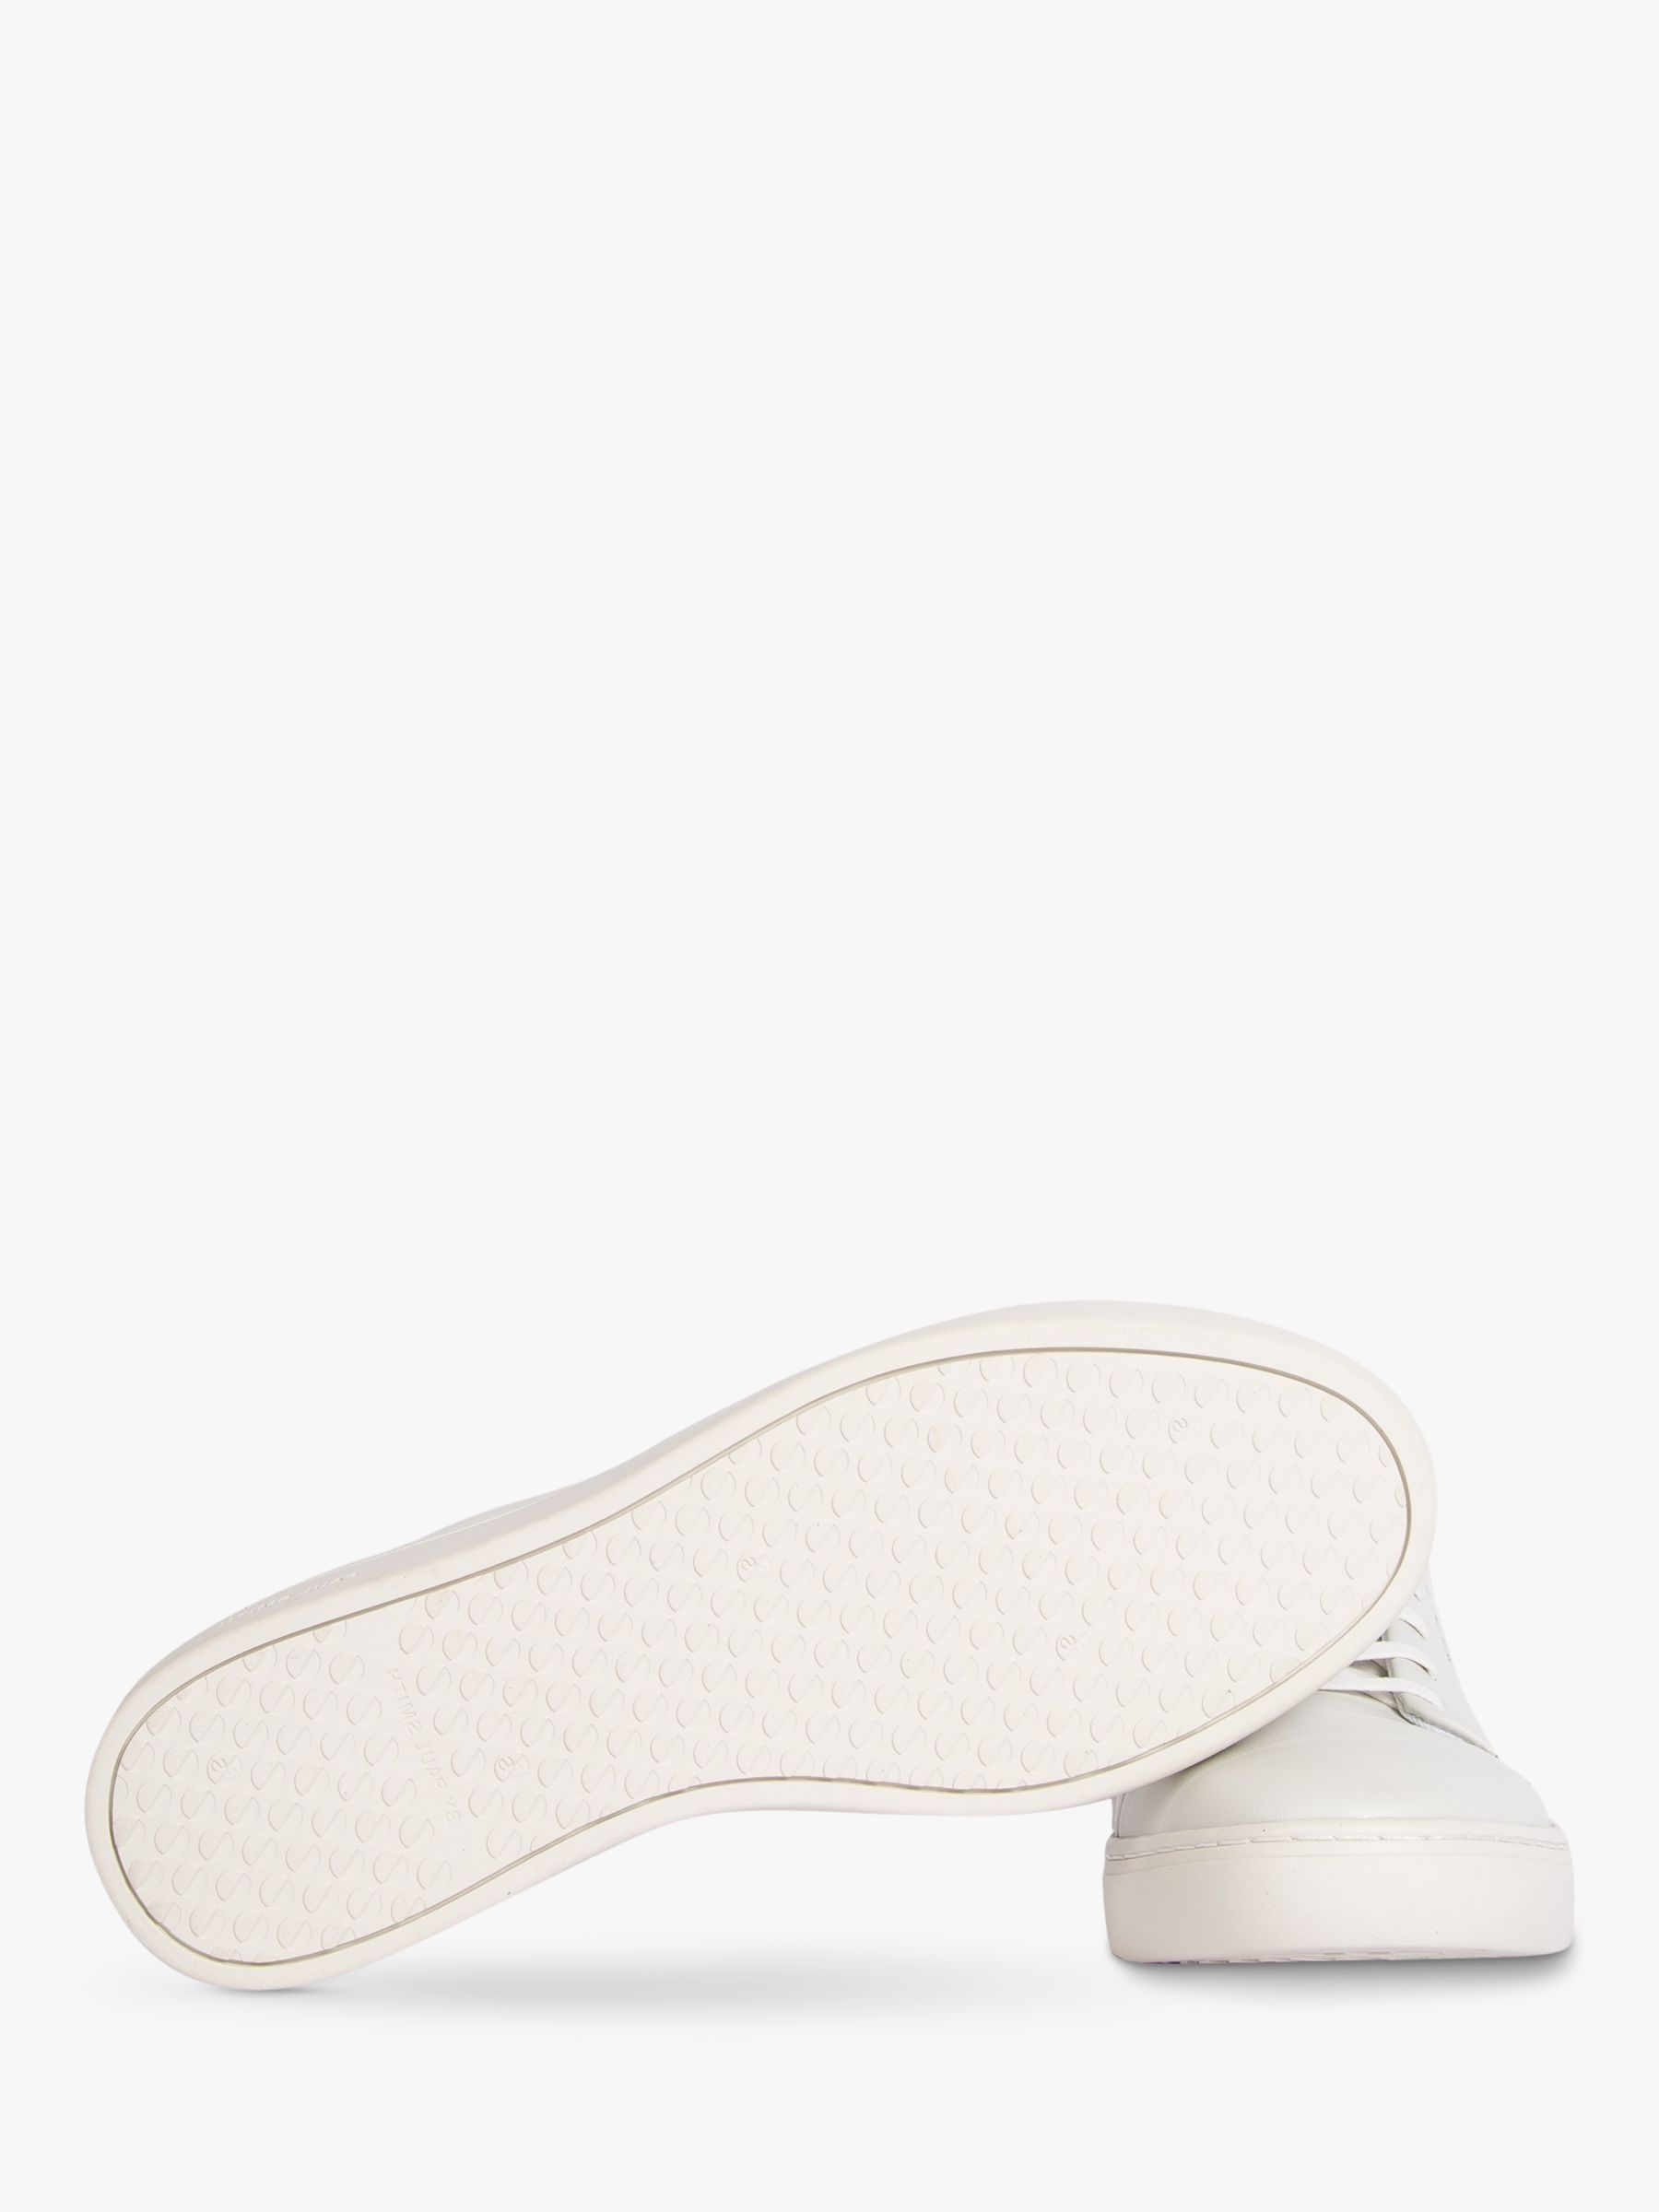 Buy Paul Smith Lee Cupsole Trainers Online at johnlewis.com